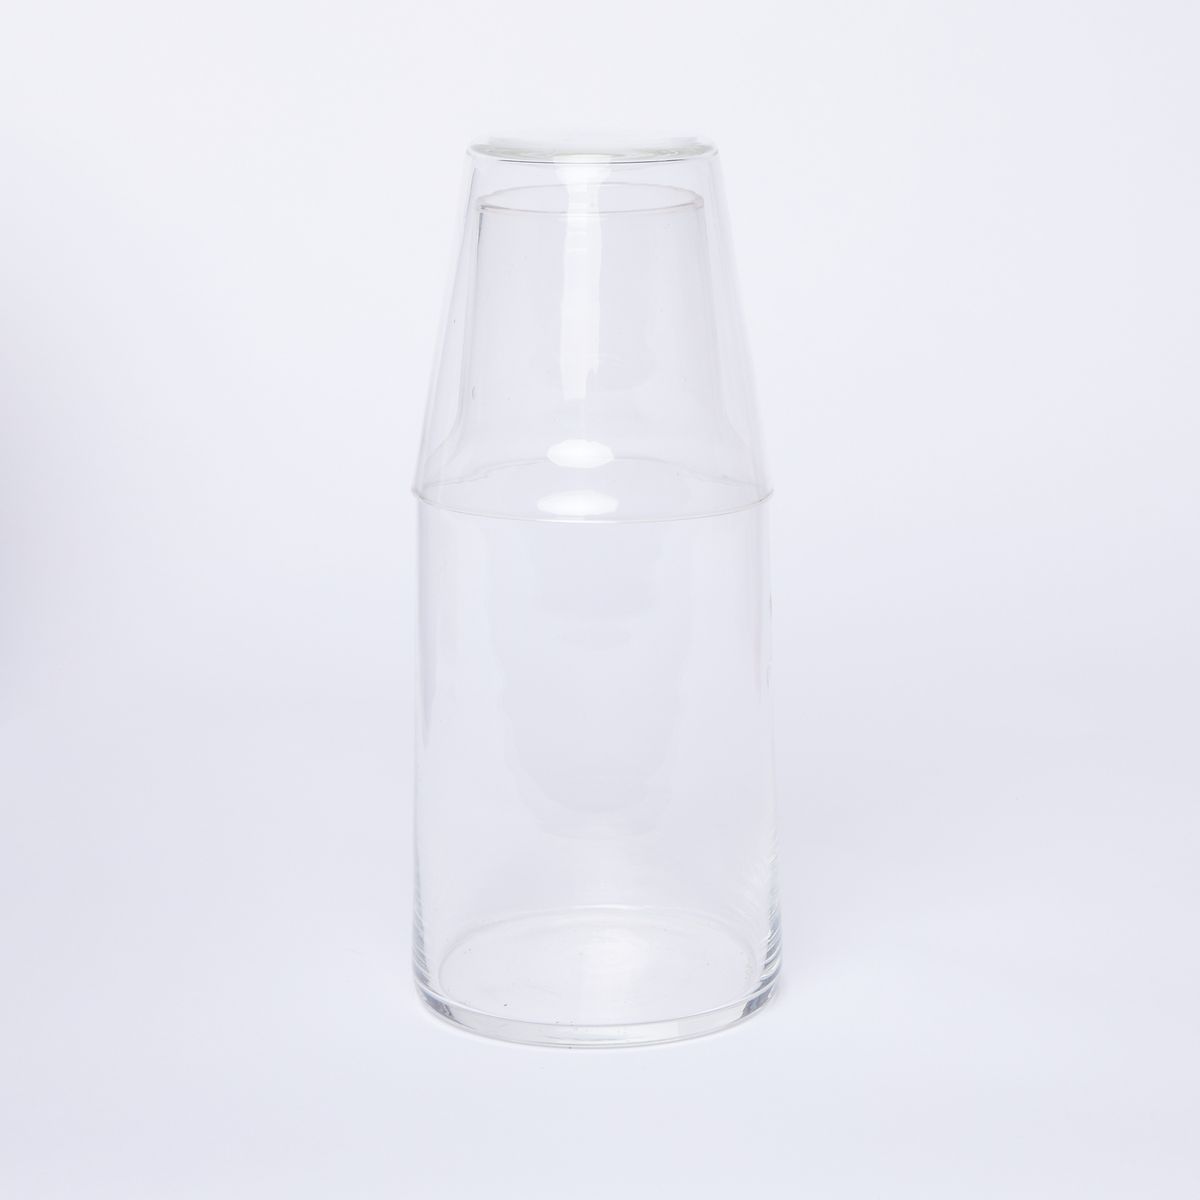 Clear glass carafe with clear glass stacked on top